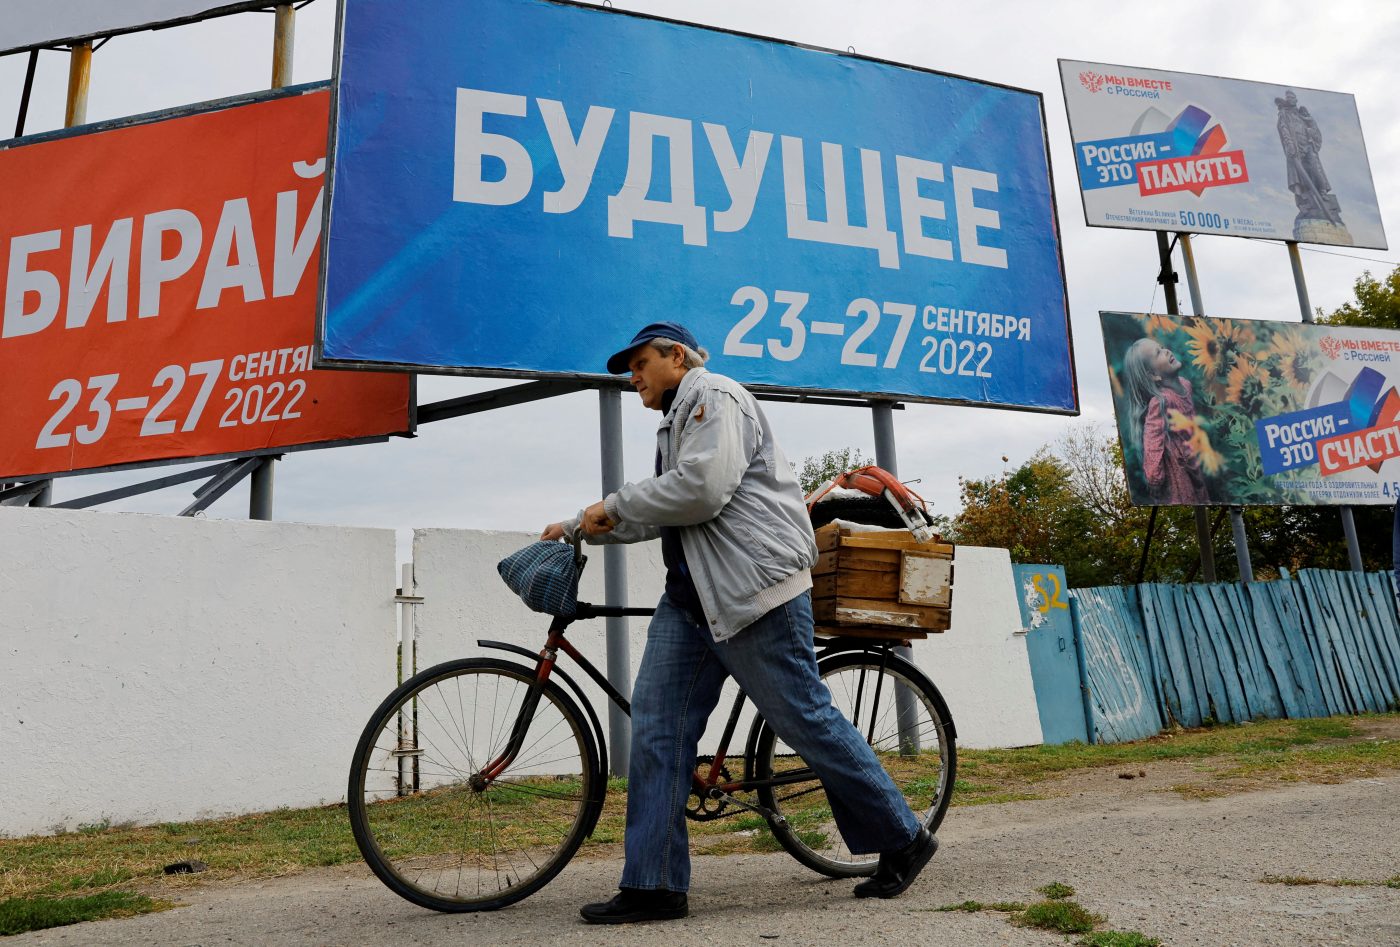 Photo: A man walks with his bicycle past banners informing about a referendum on the joining of Russian-controlled regions of Ukraine to Russia, in the Russian-controlled city of Melitopol in the Zaporizhzhia region, Ukraine September 26, 2022. The banner (C) reads: "Future. 23-27 September 2022". Credit: REUTERS/Alexander Ermochenko